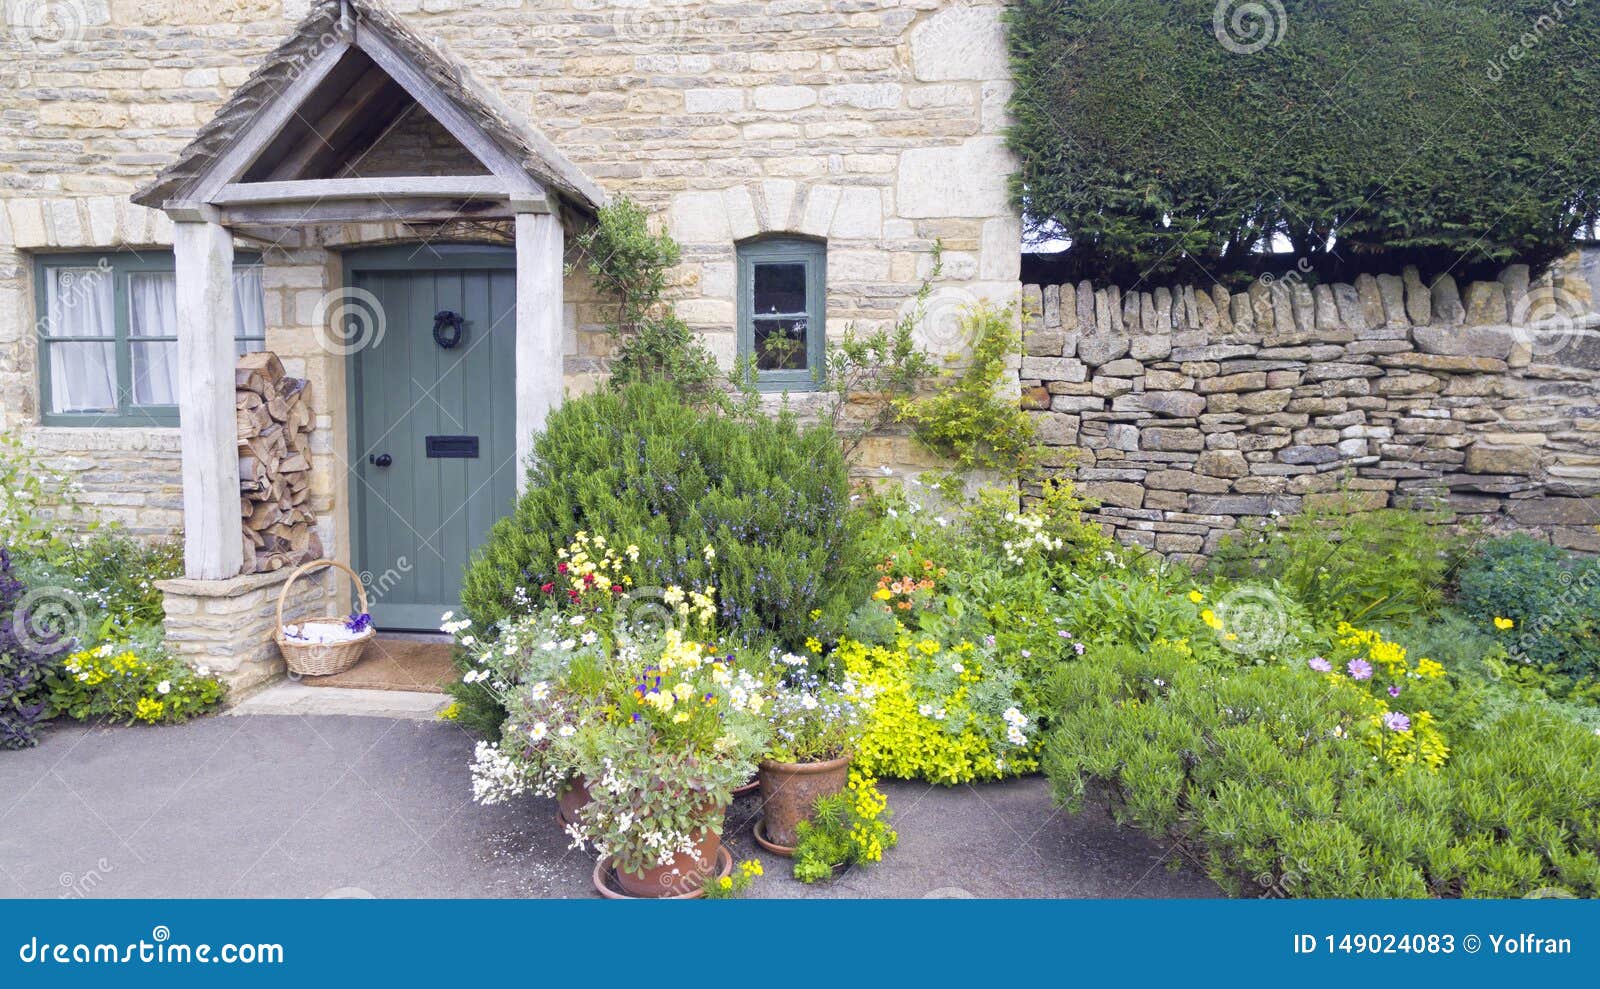 English Cottage Garden With Flowers, Herbs By A Stone House Porch . Stock  Image - Image Of English, Lush: 149024083